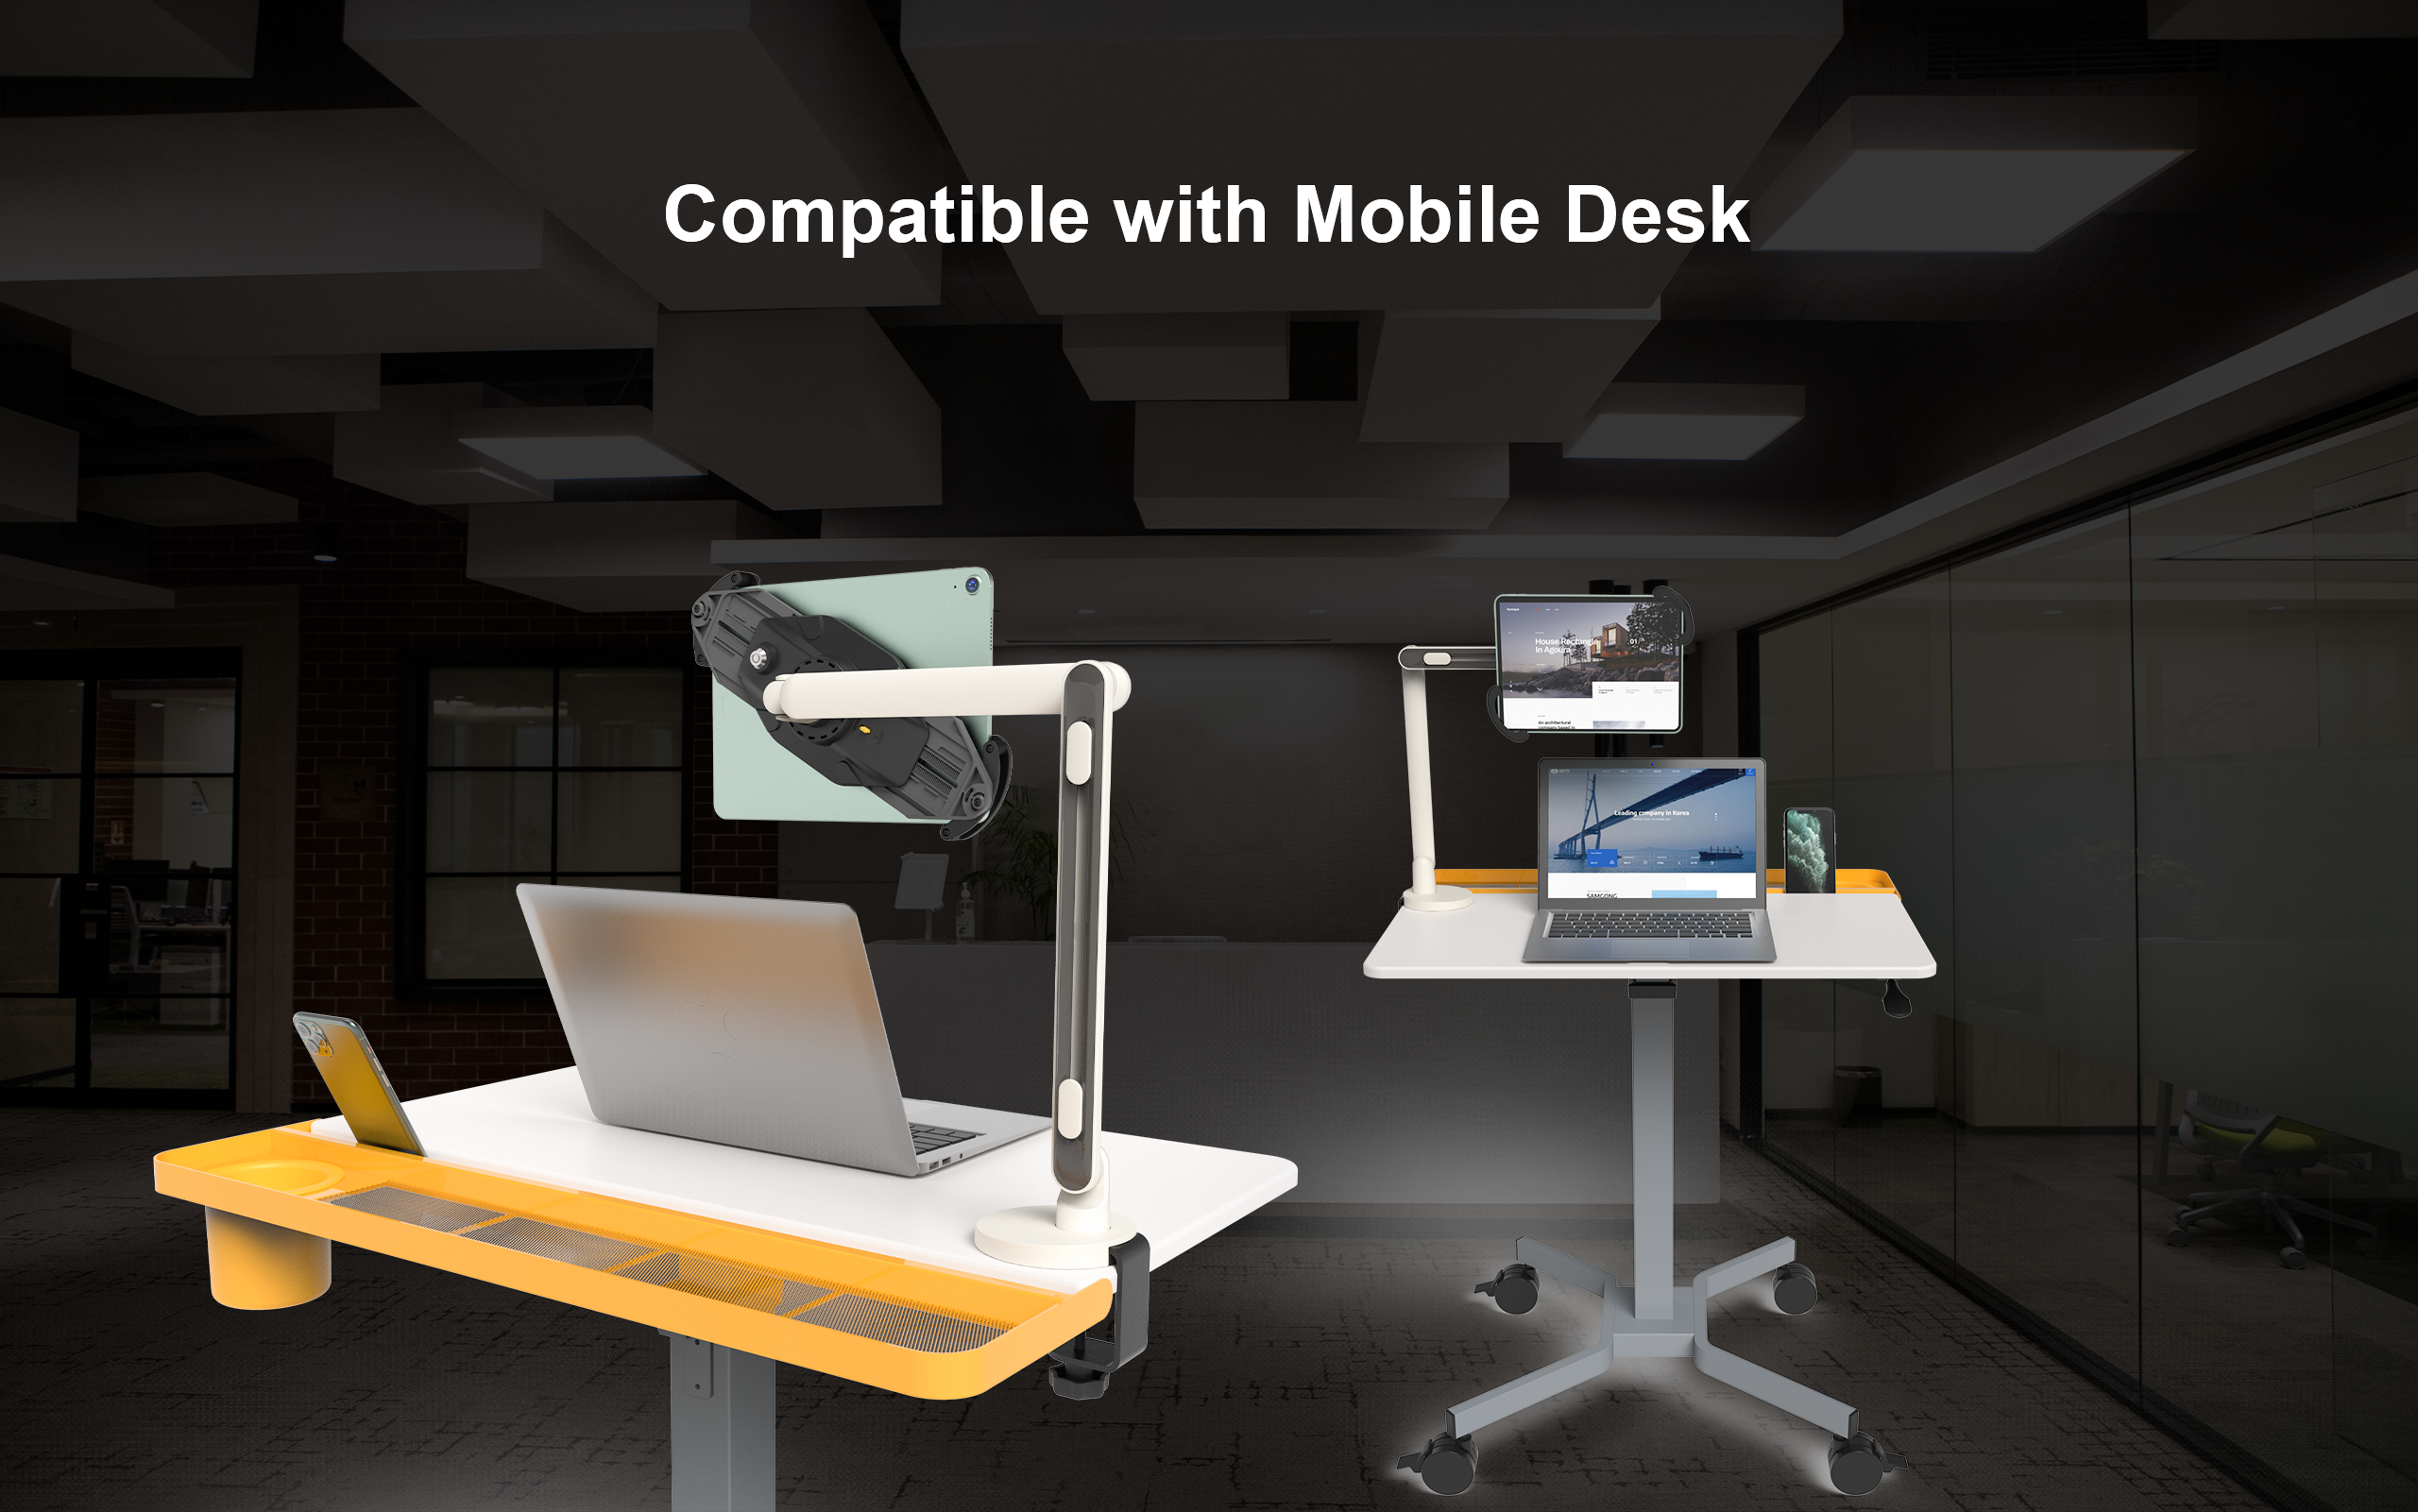 Tablet swing arm mount compatible with mobile desk